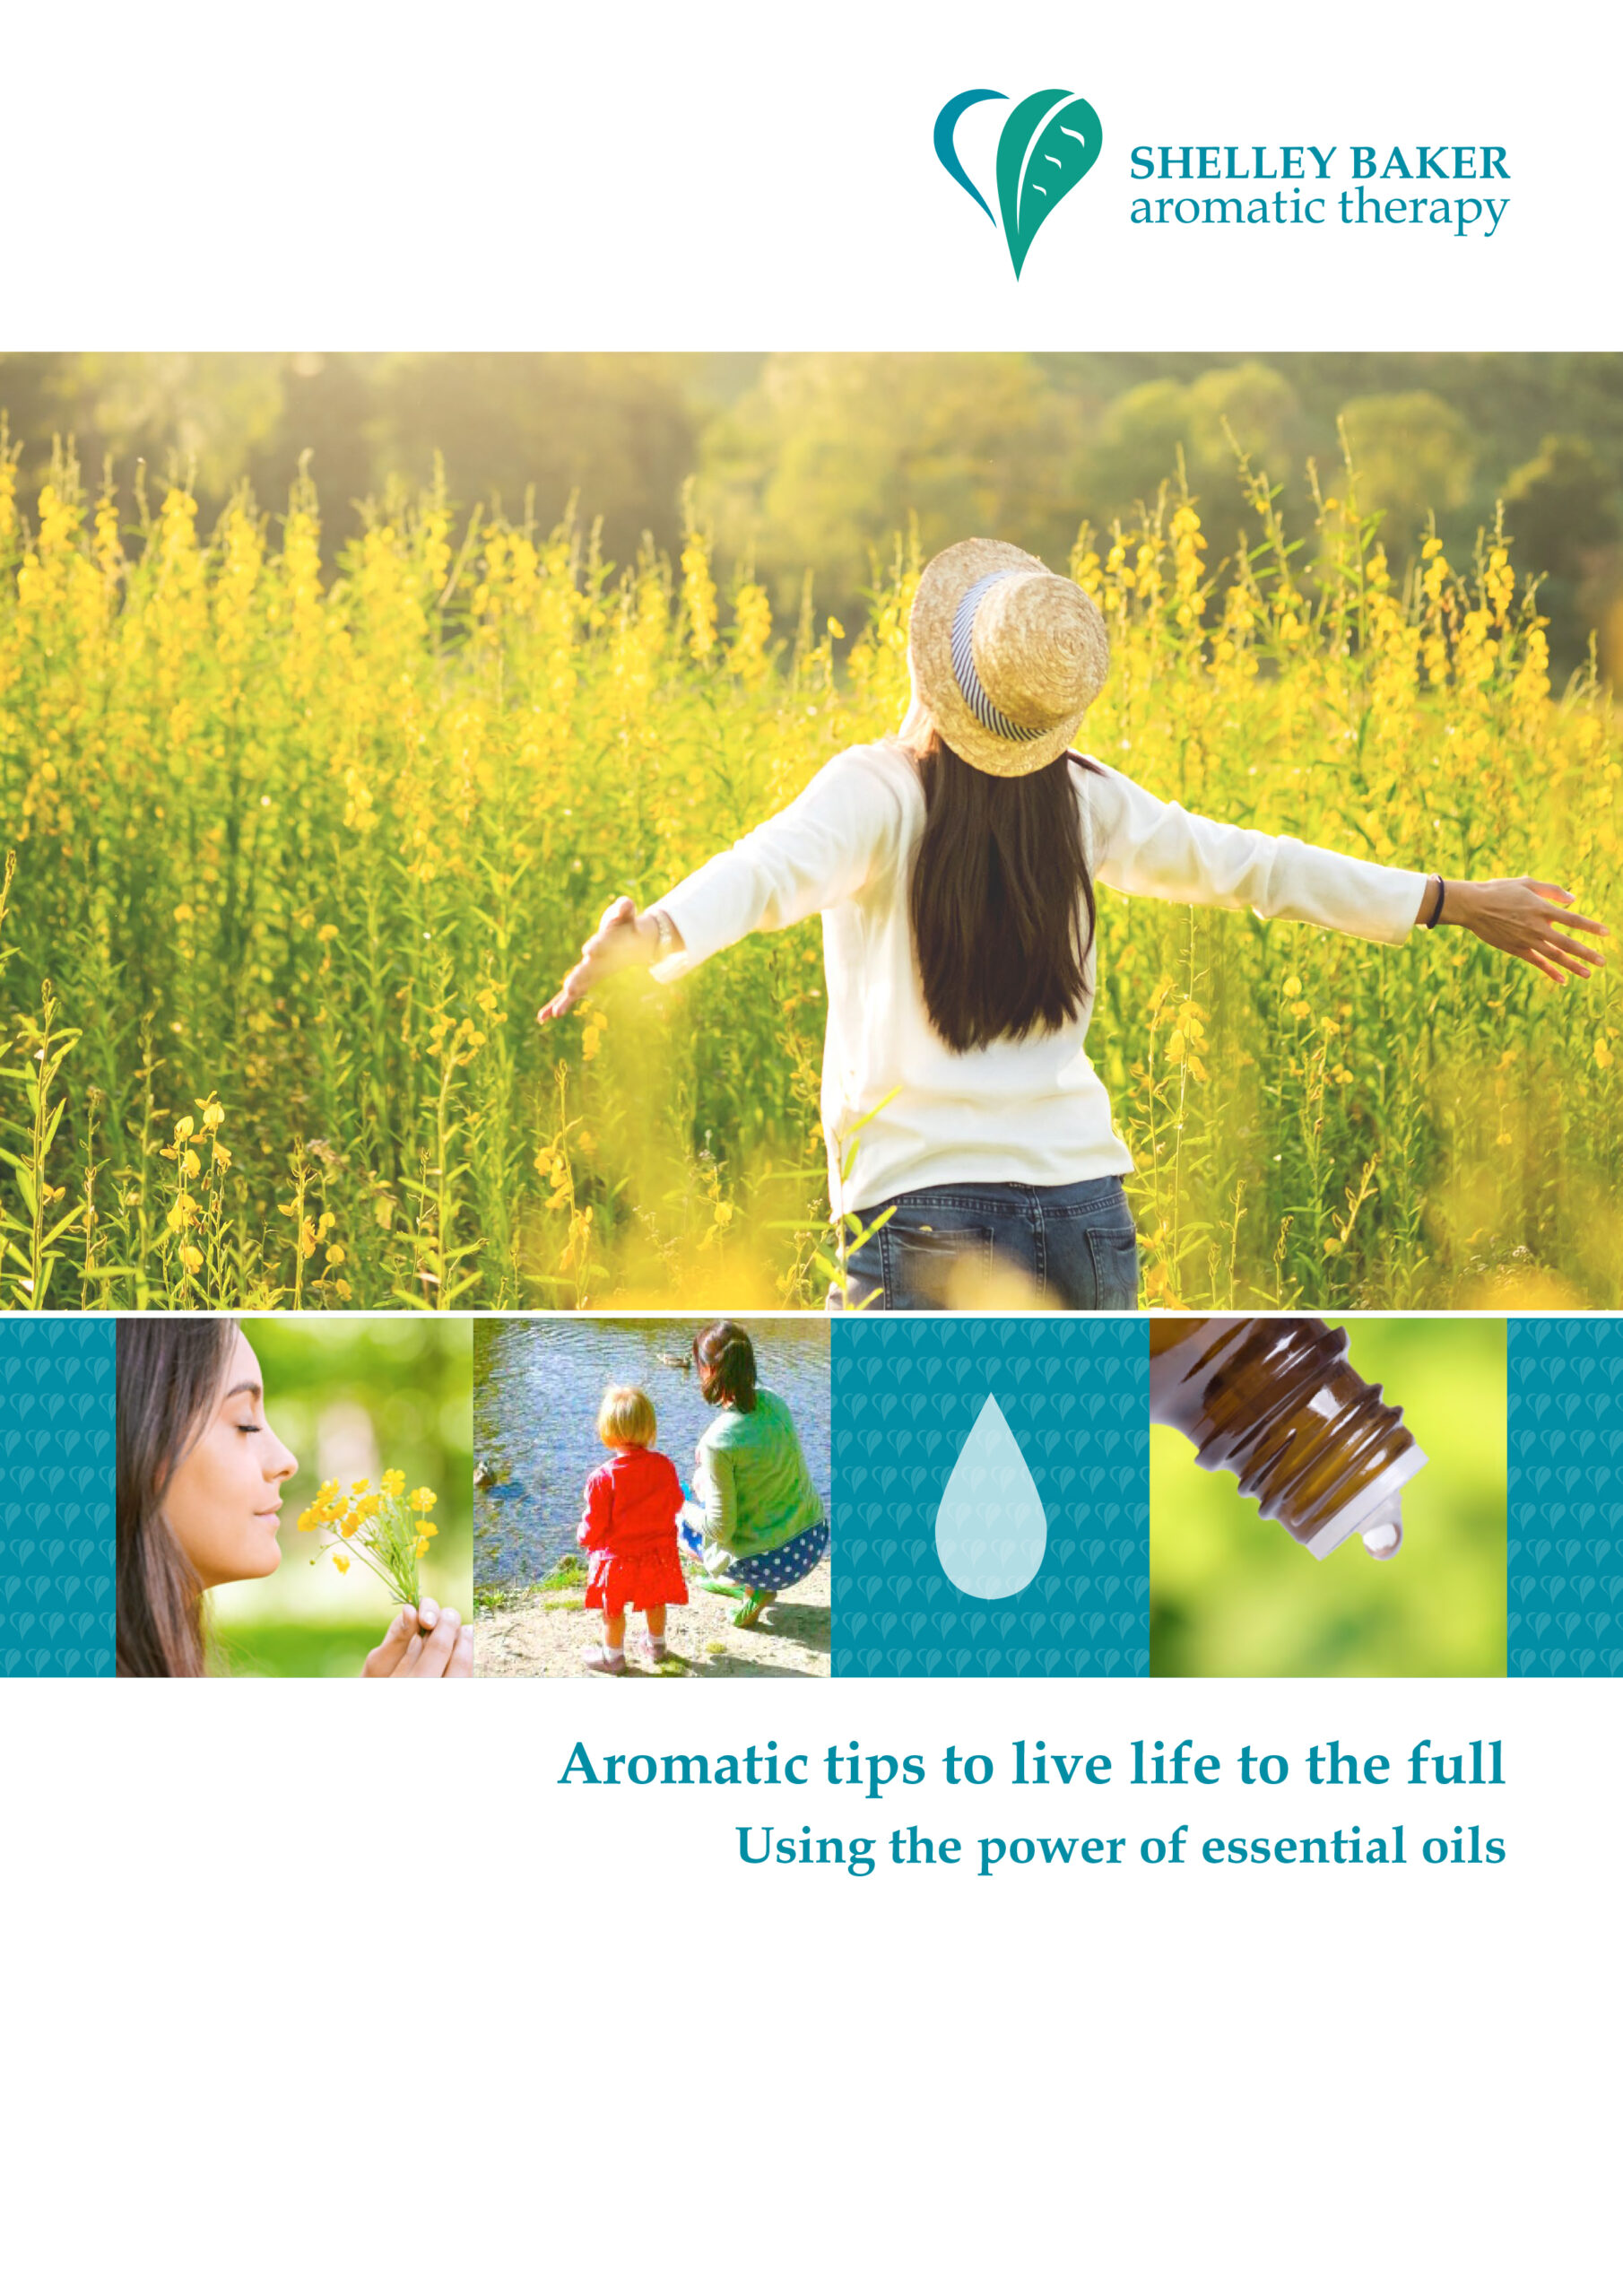 Aromatic tips to live life to the full